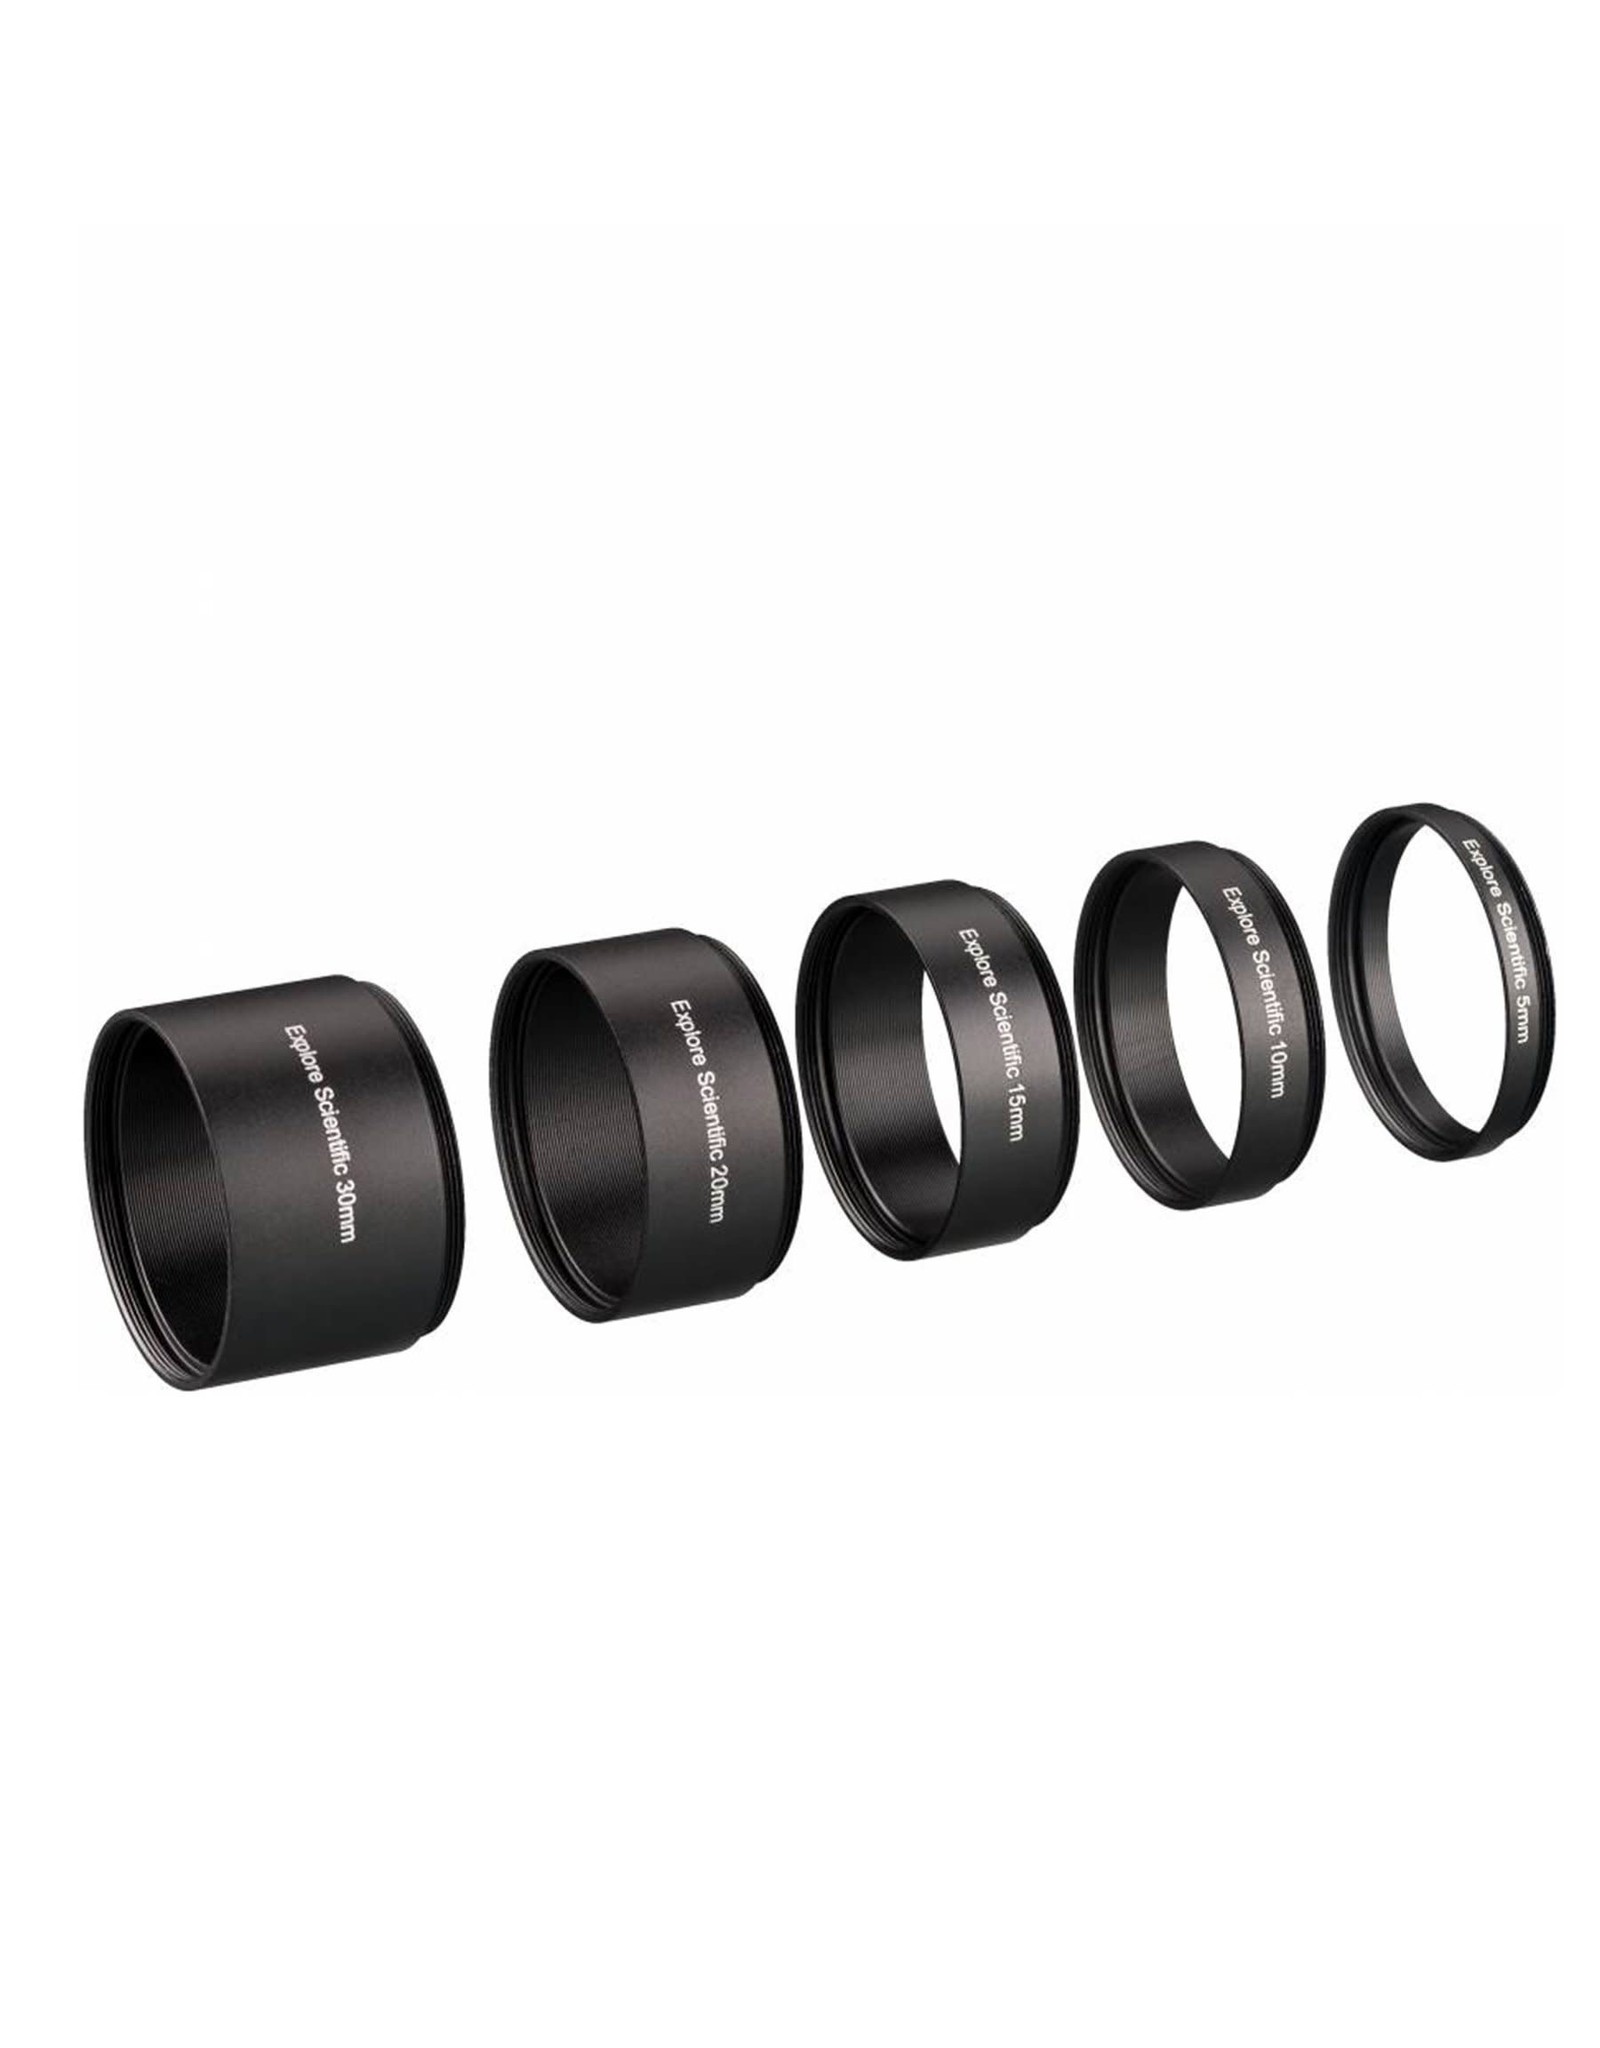 Explore Scientific Explore Scientific Extension Ring Set M48x0.75 - 5 pieces (30, 20, 15, 10 and 5 mm)